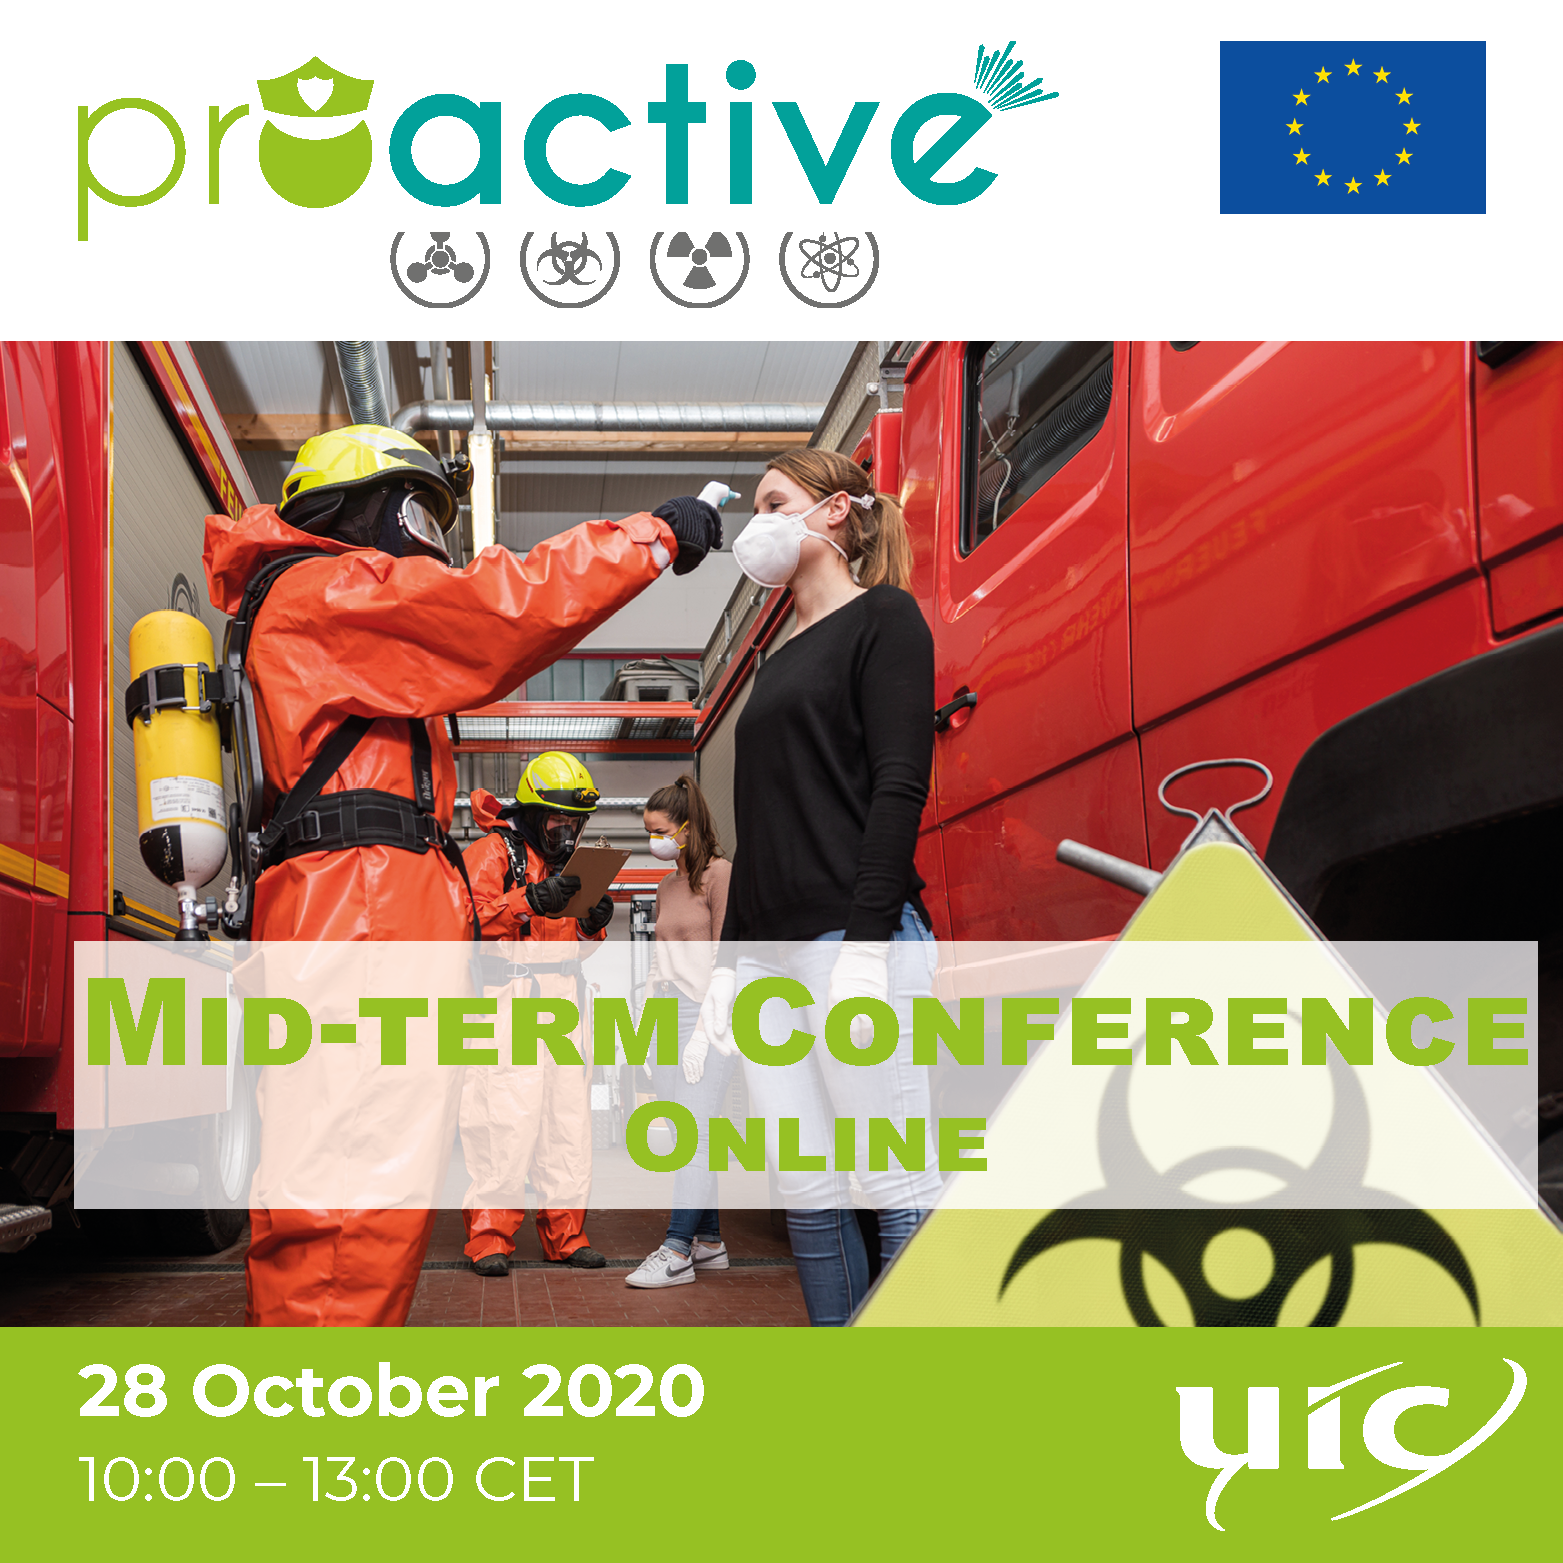 ProActive mid-term conference